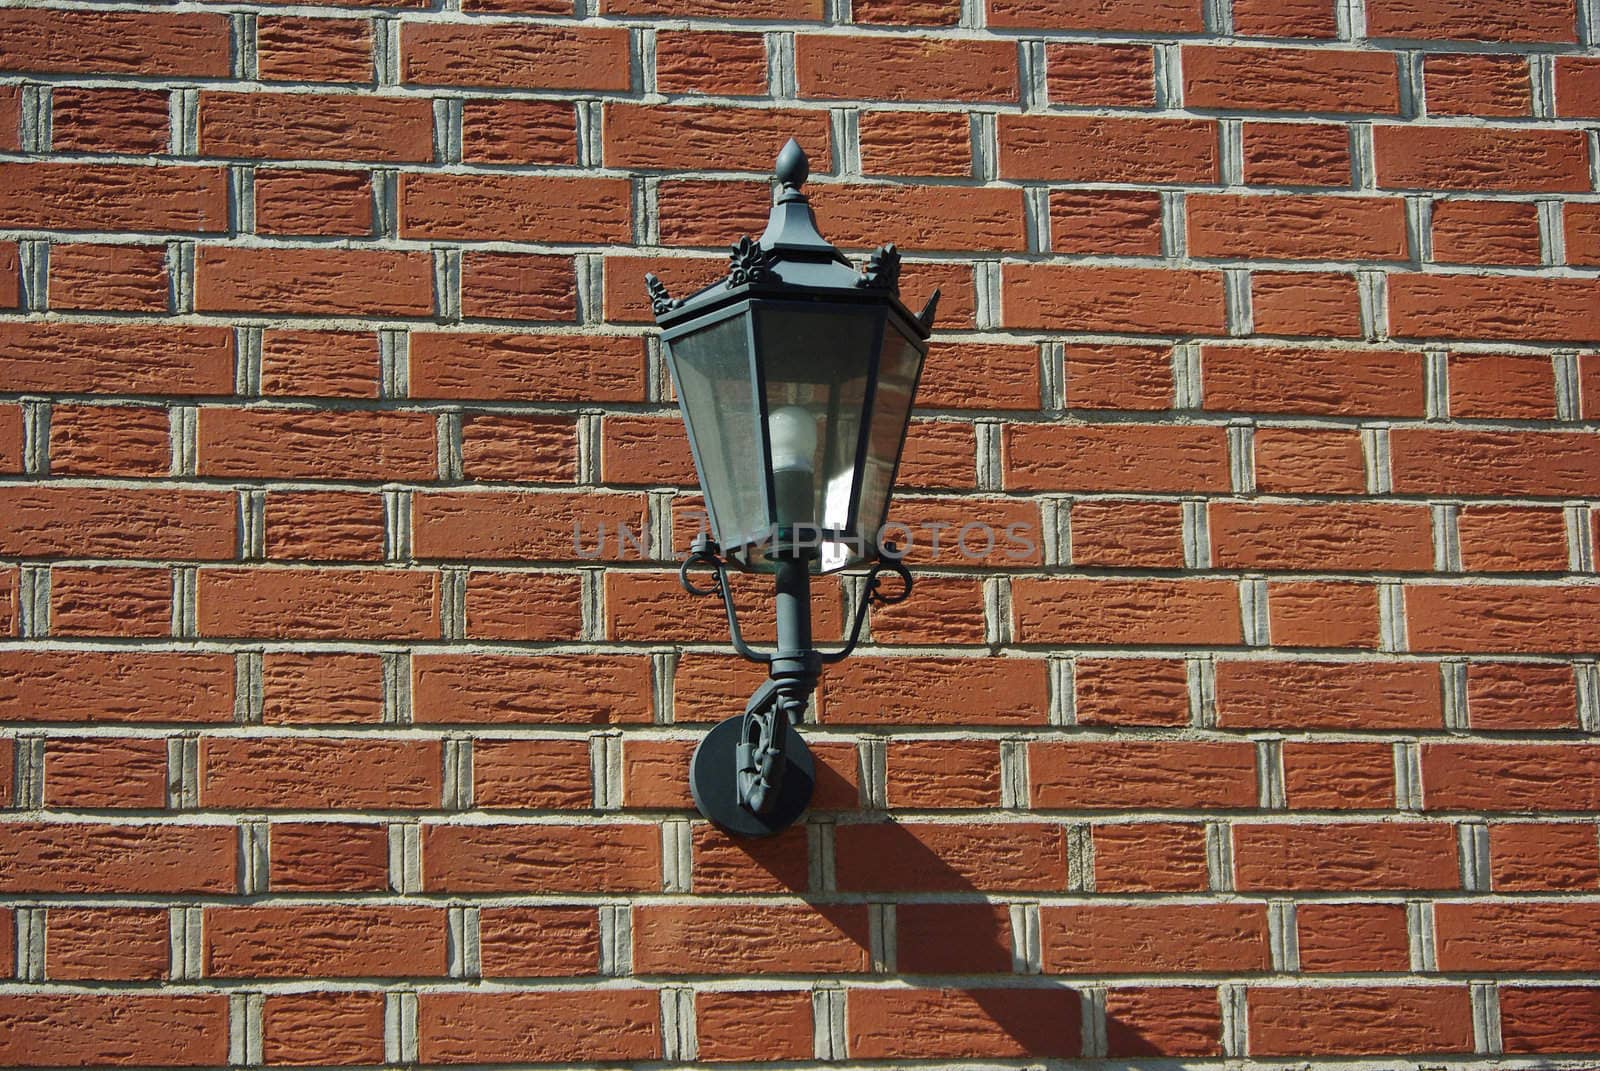 Lantern Attached To A Brick Wall by Vitamin